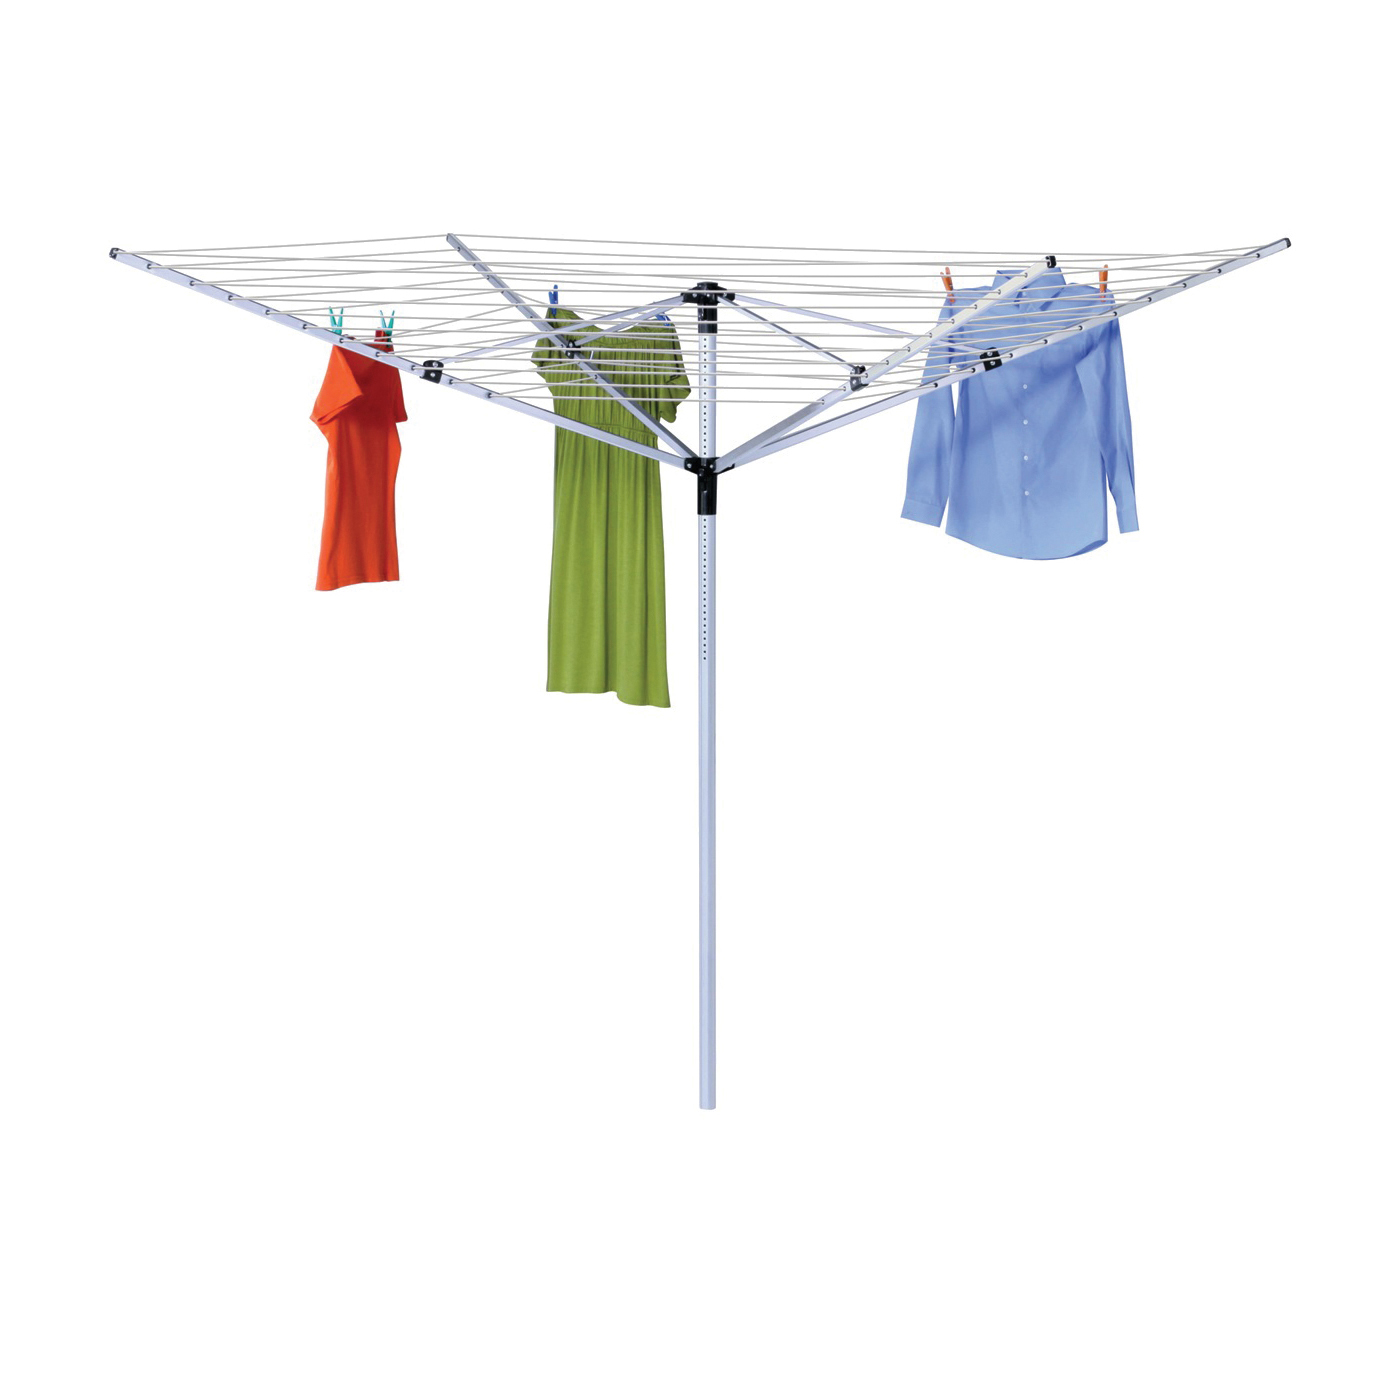 Honey-Can-Do DRY-05262 Umbrella Clothes Dryer, 57 in L, Steel, White